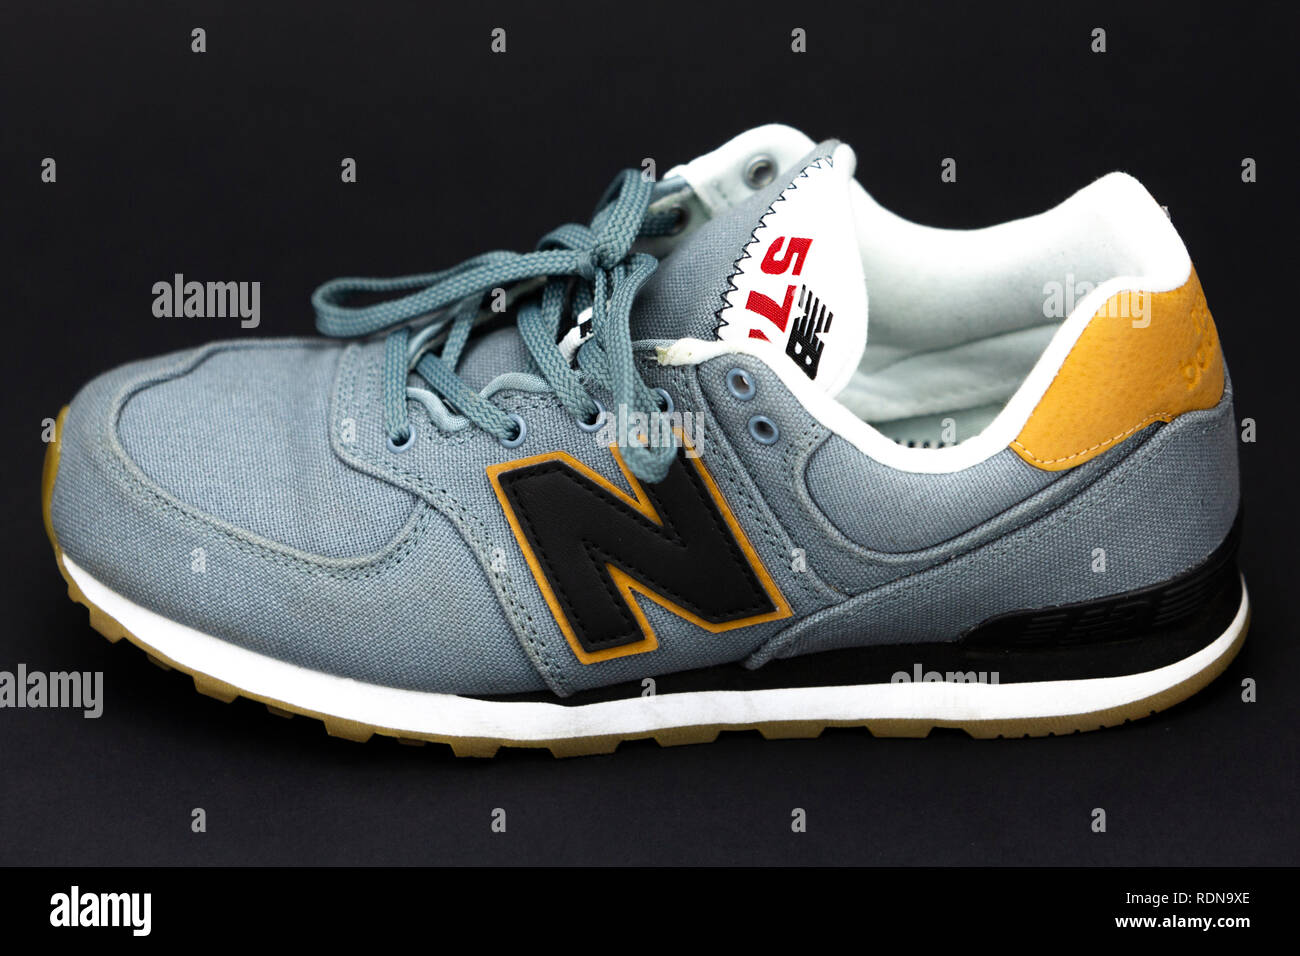 New Balance sports shoes isolated on gradient background Stock Photo - Alamy